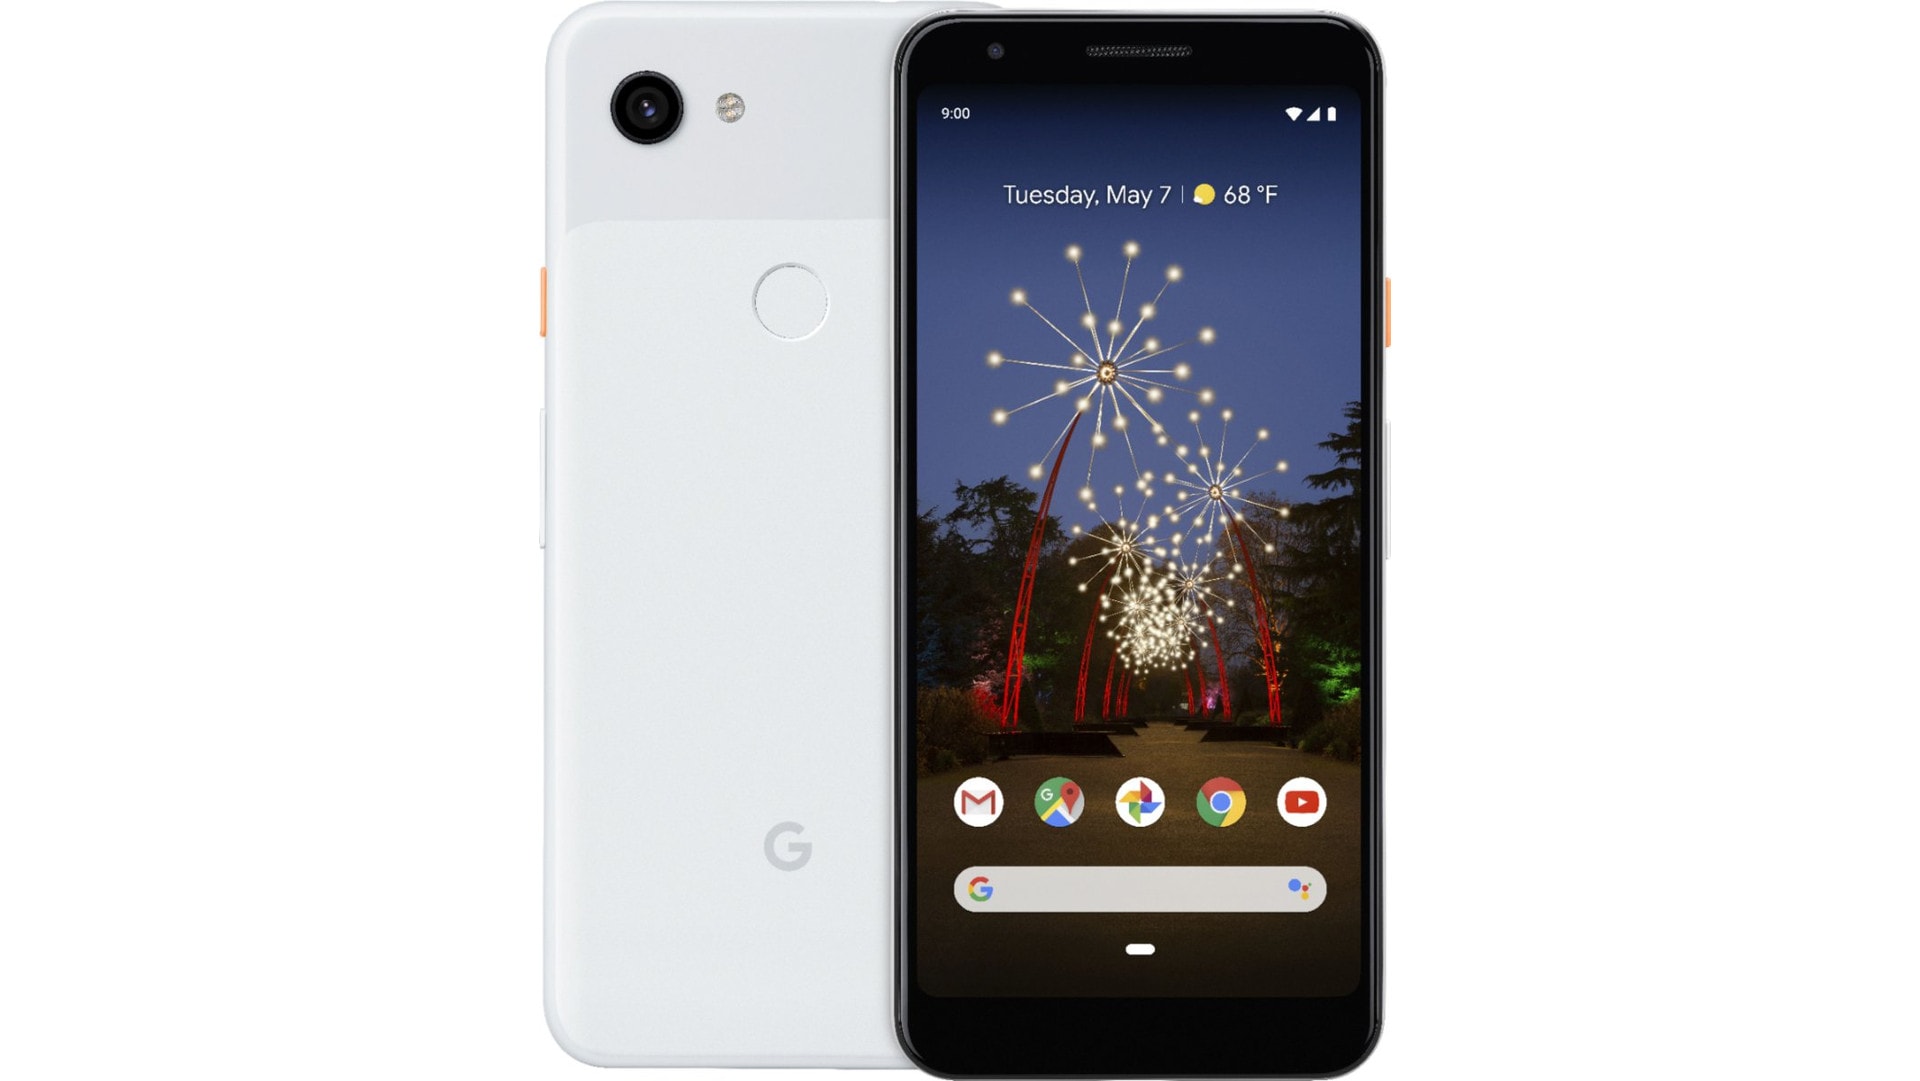 Google Pixel 3a leaks in a new high-resolution render